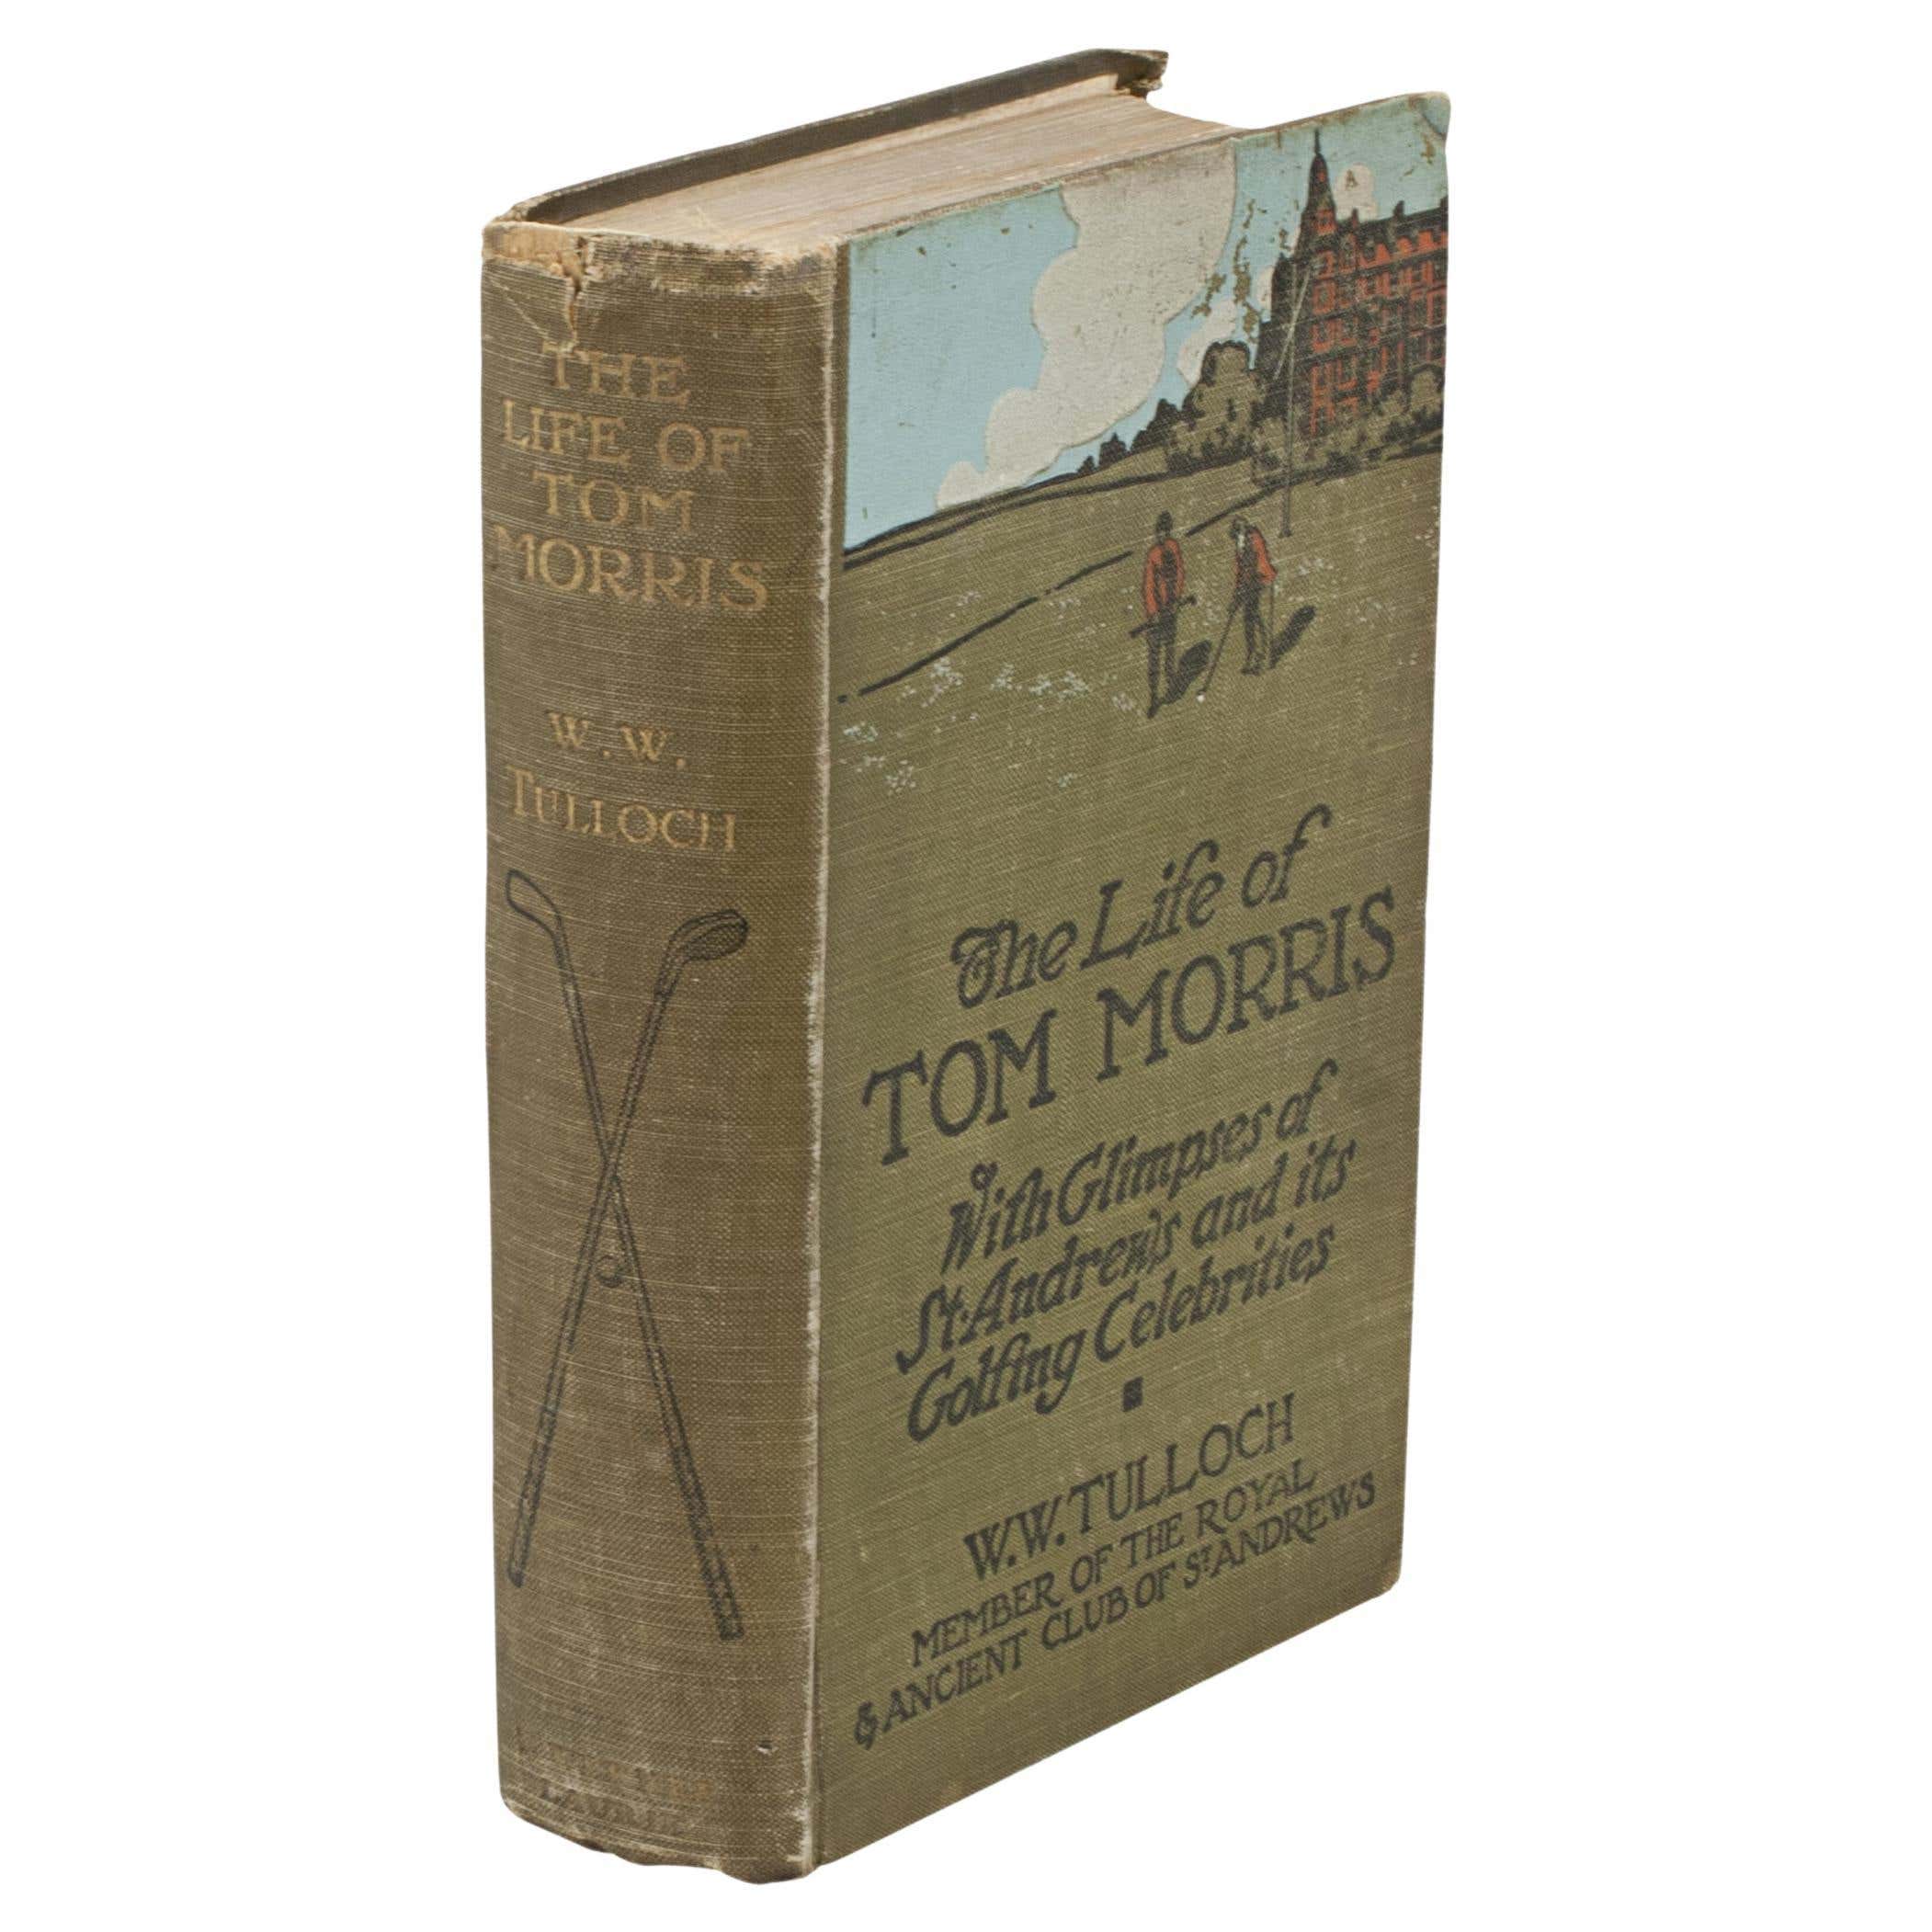 https://a.1stdibscdn.com/vintage-golf-book-the-life-of-tom-morris-for-sale/f_9757/f_366411921697465465842/f_36641192_1697465466658_bg_processed.jpg?disable=upscale&auto=webp&quality=60&width=200%20200w